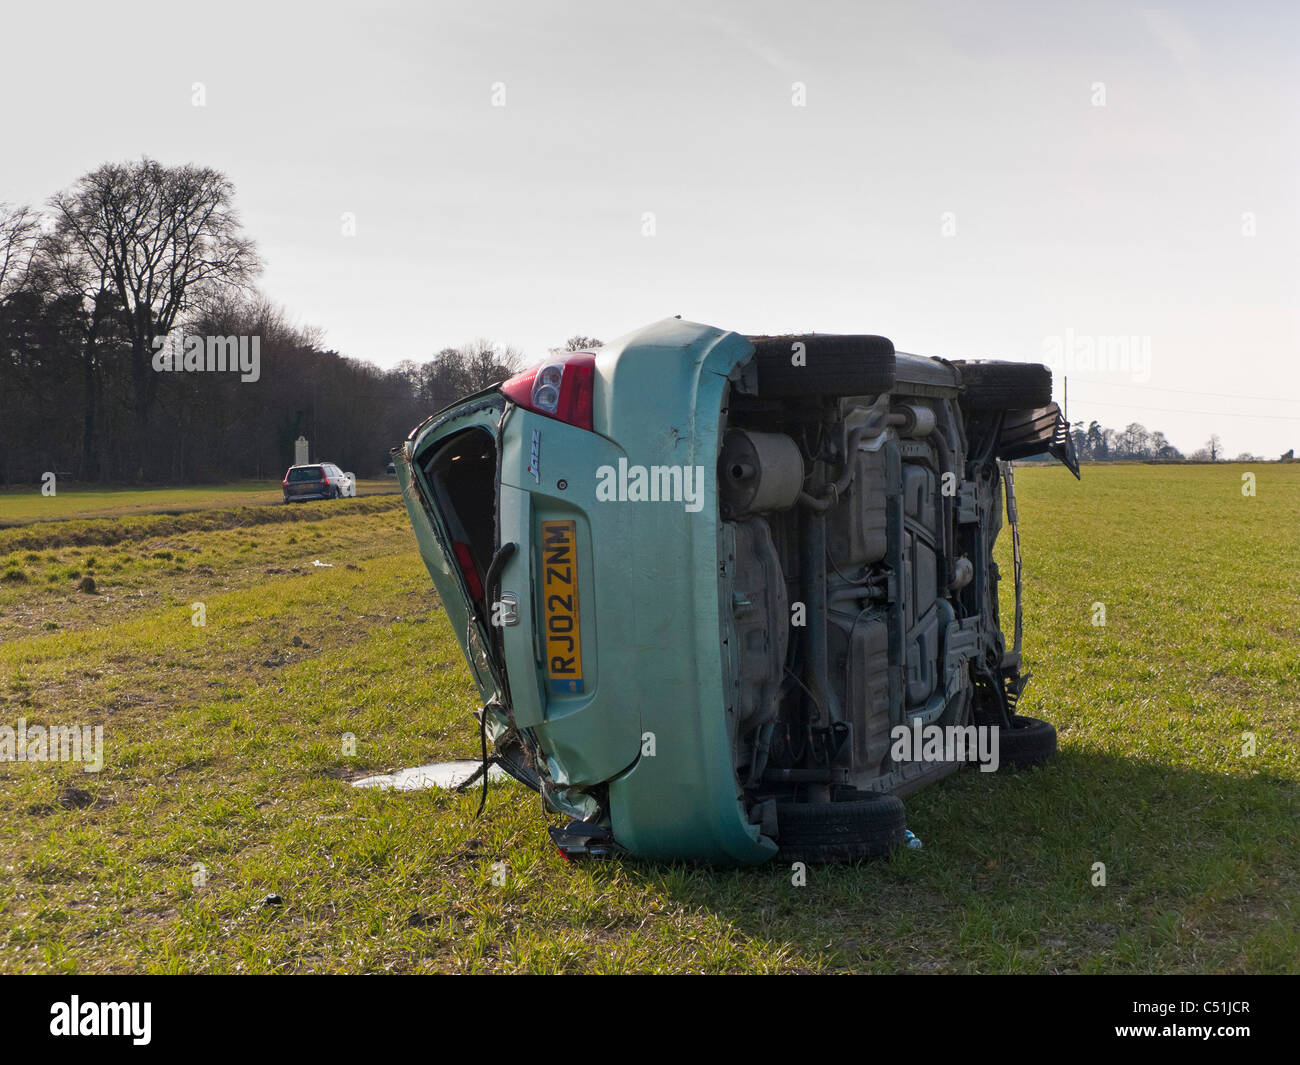 Honda Jazz car accident wrecked rolled in field. JMH5089 Stock Photo